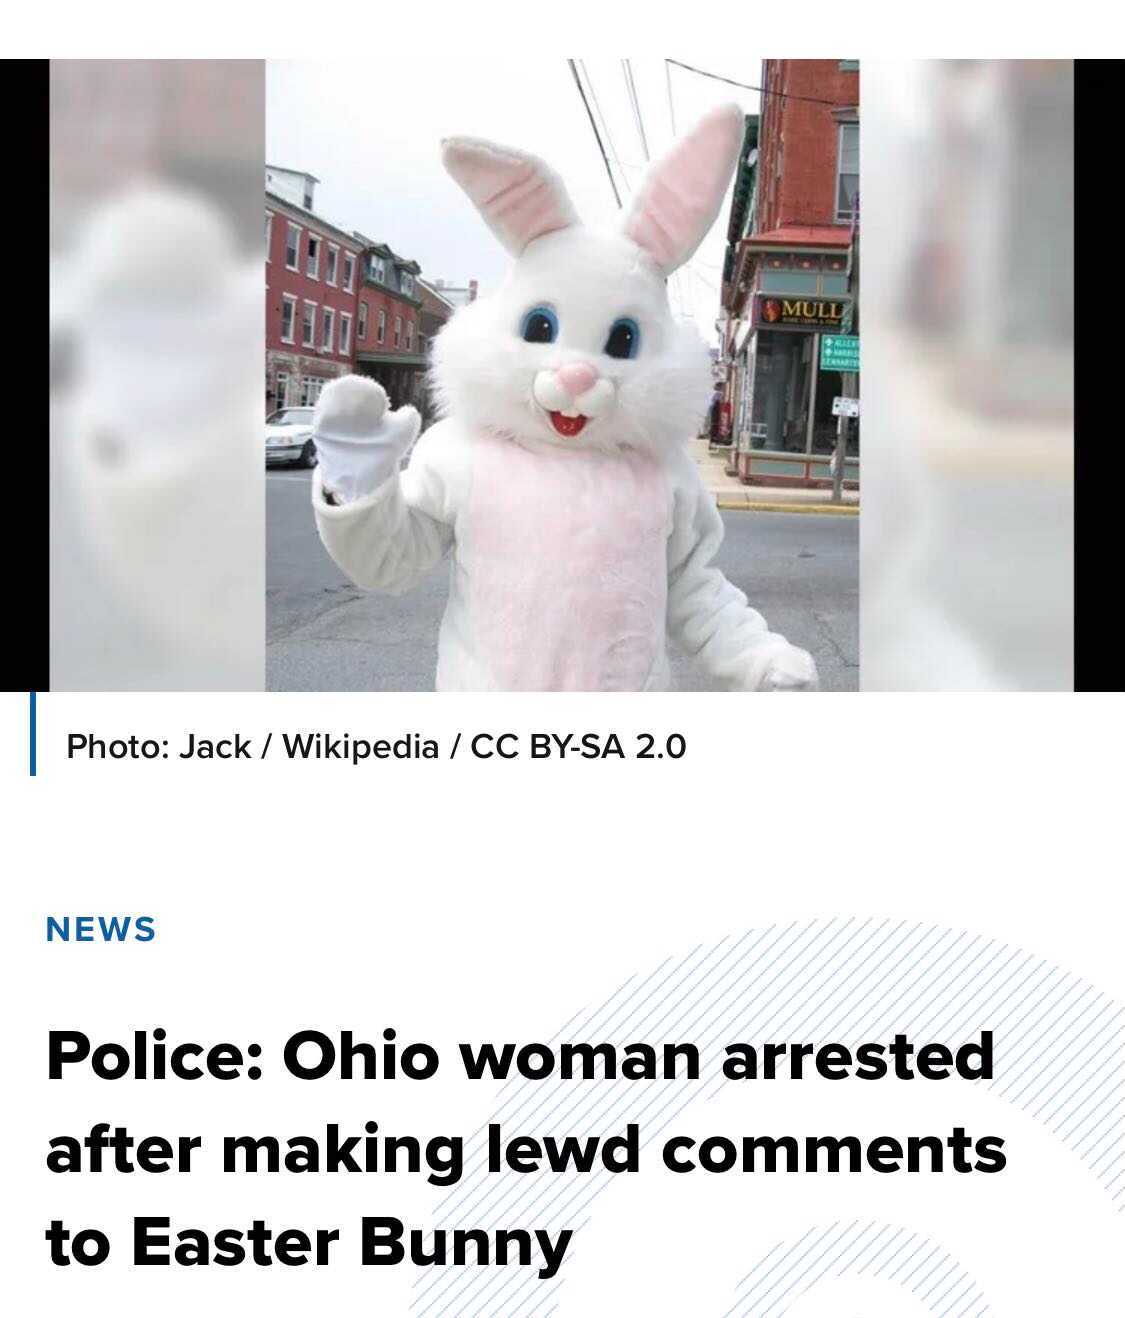 photo caption - Mull Photo Jack Wikipedia Cc BySa 2.0 News Police Ohio woman arrested after making lewd to Easter Bunny